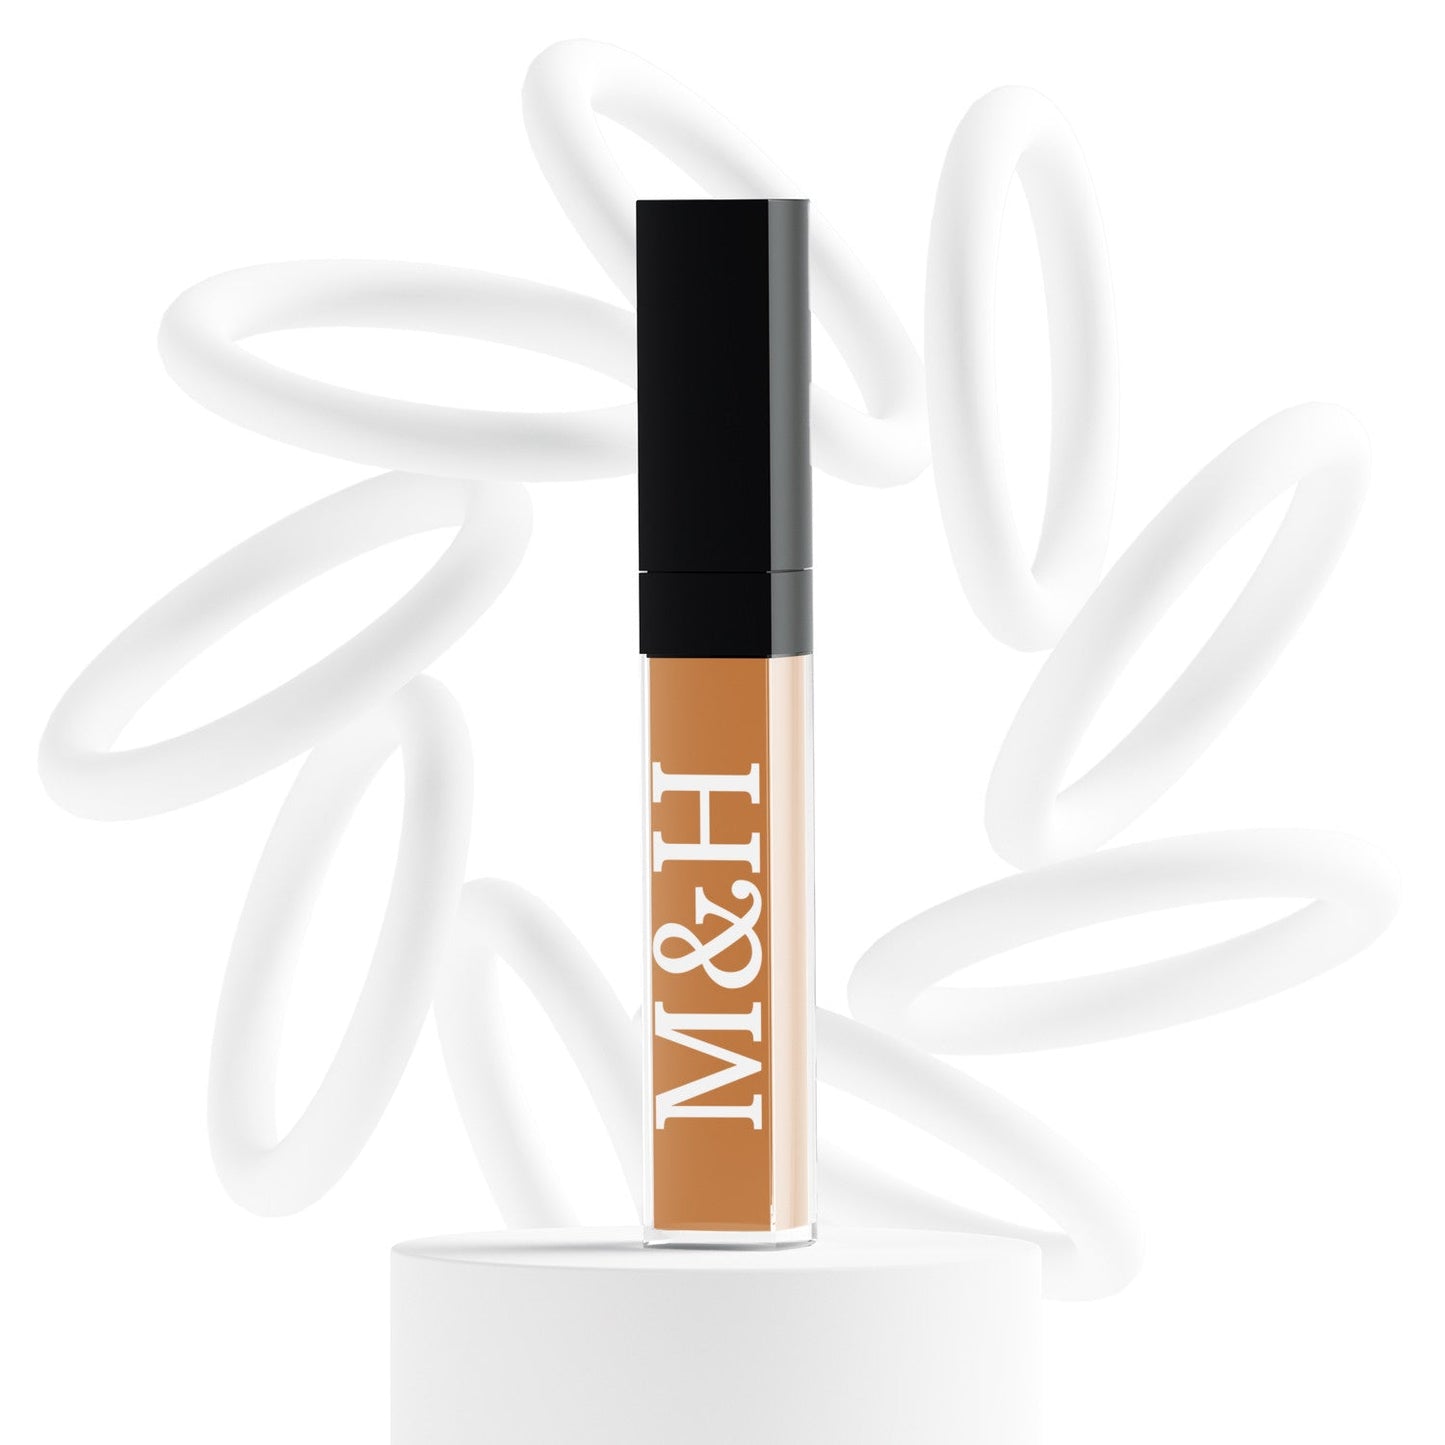 Vegan Concealers - M&H FashionVegan ConcealersconcealerM&H FashionM&H FashionConcealer-955AlmondVegan ConcealersM&H FashionconcealerM&H Fashion This multifunctional concealer is designed to cover under-eye circles, complexion alterations, and major imperfections like scars, hyperpigmentation, burns, and tatVegan Concealers